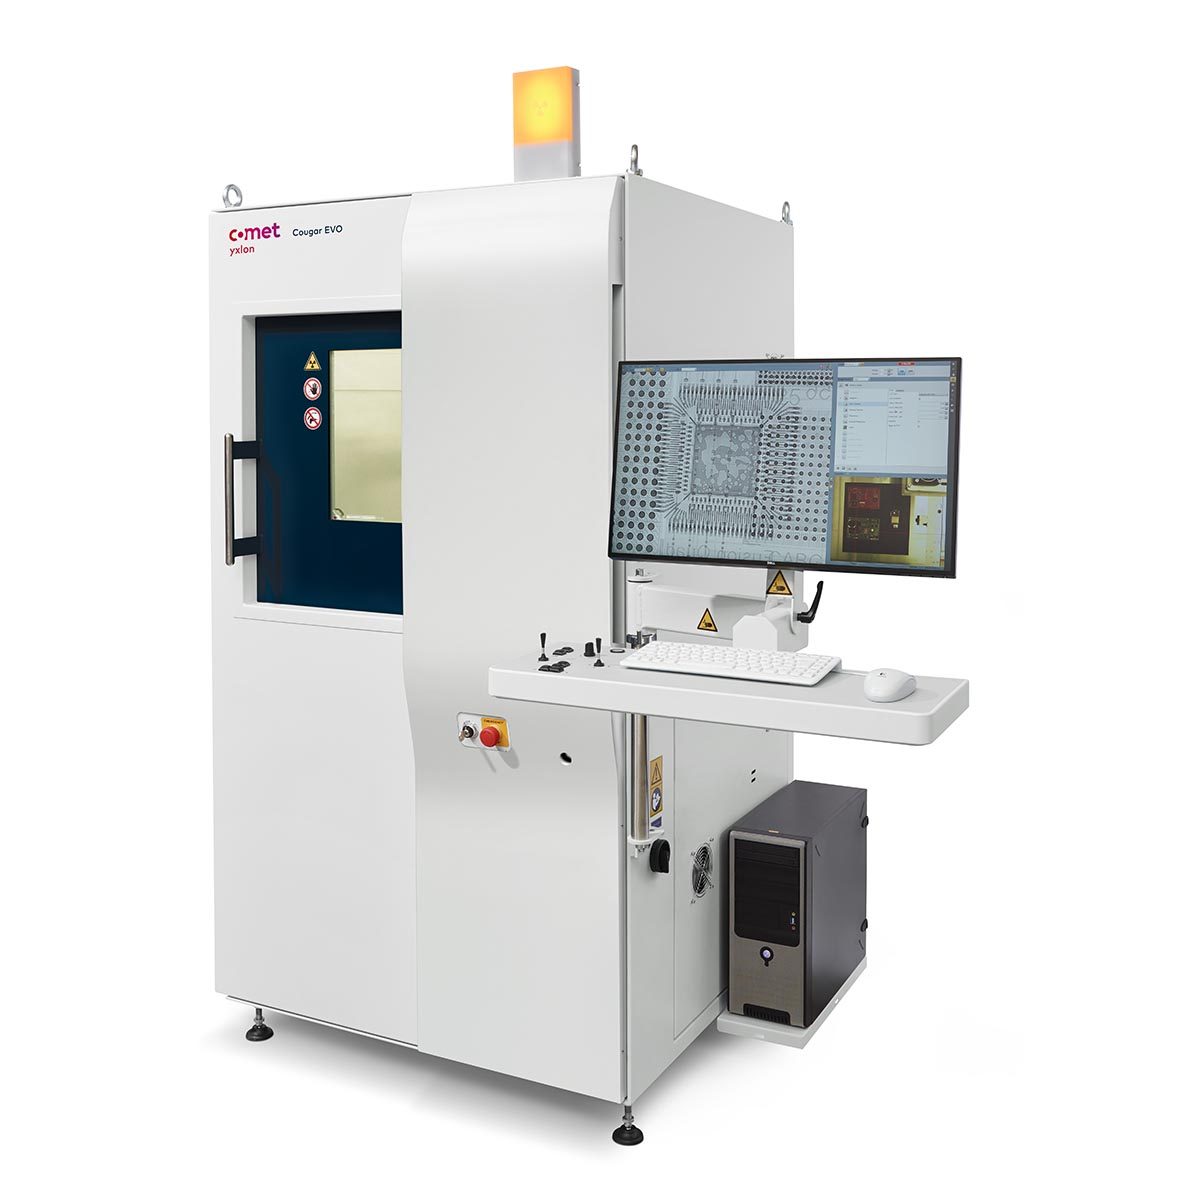 Coment Yxlon Cougar EVO X-ray inspection system